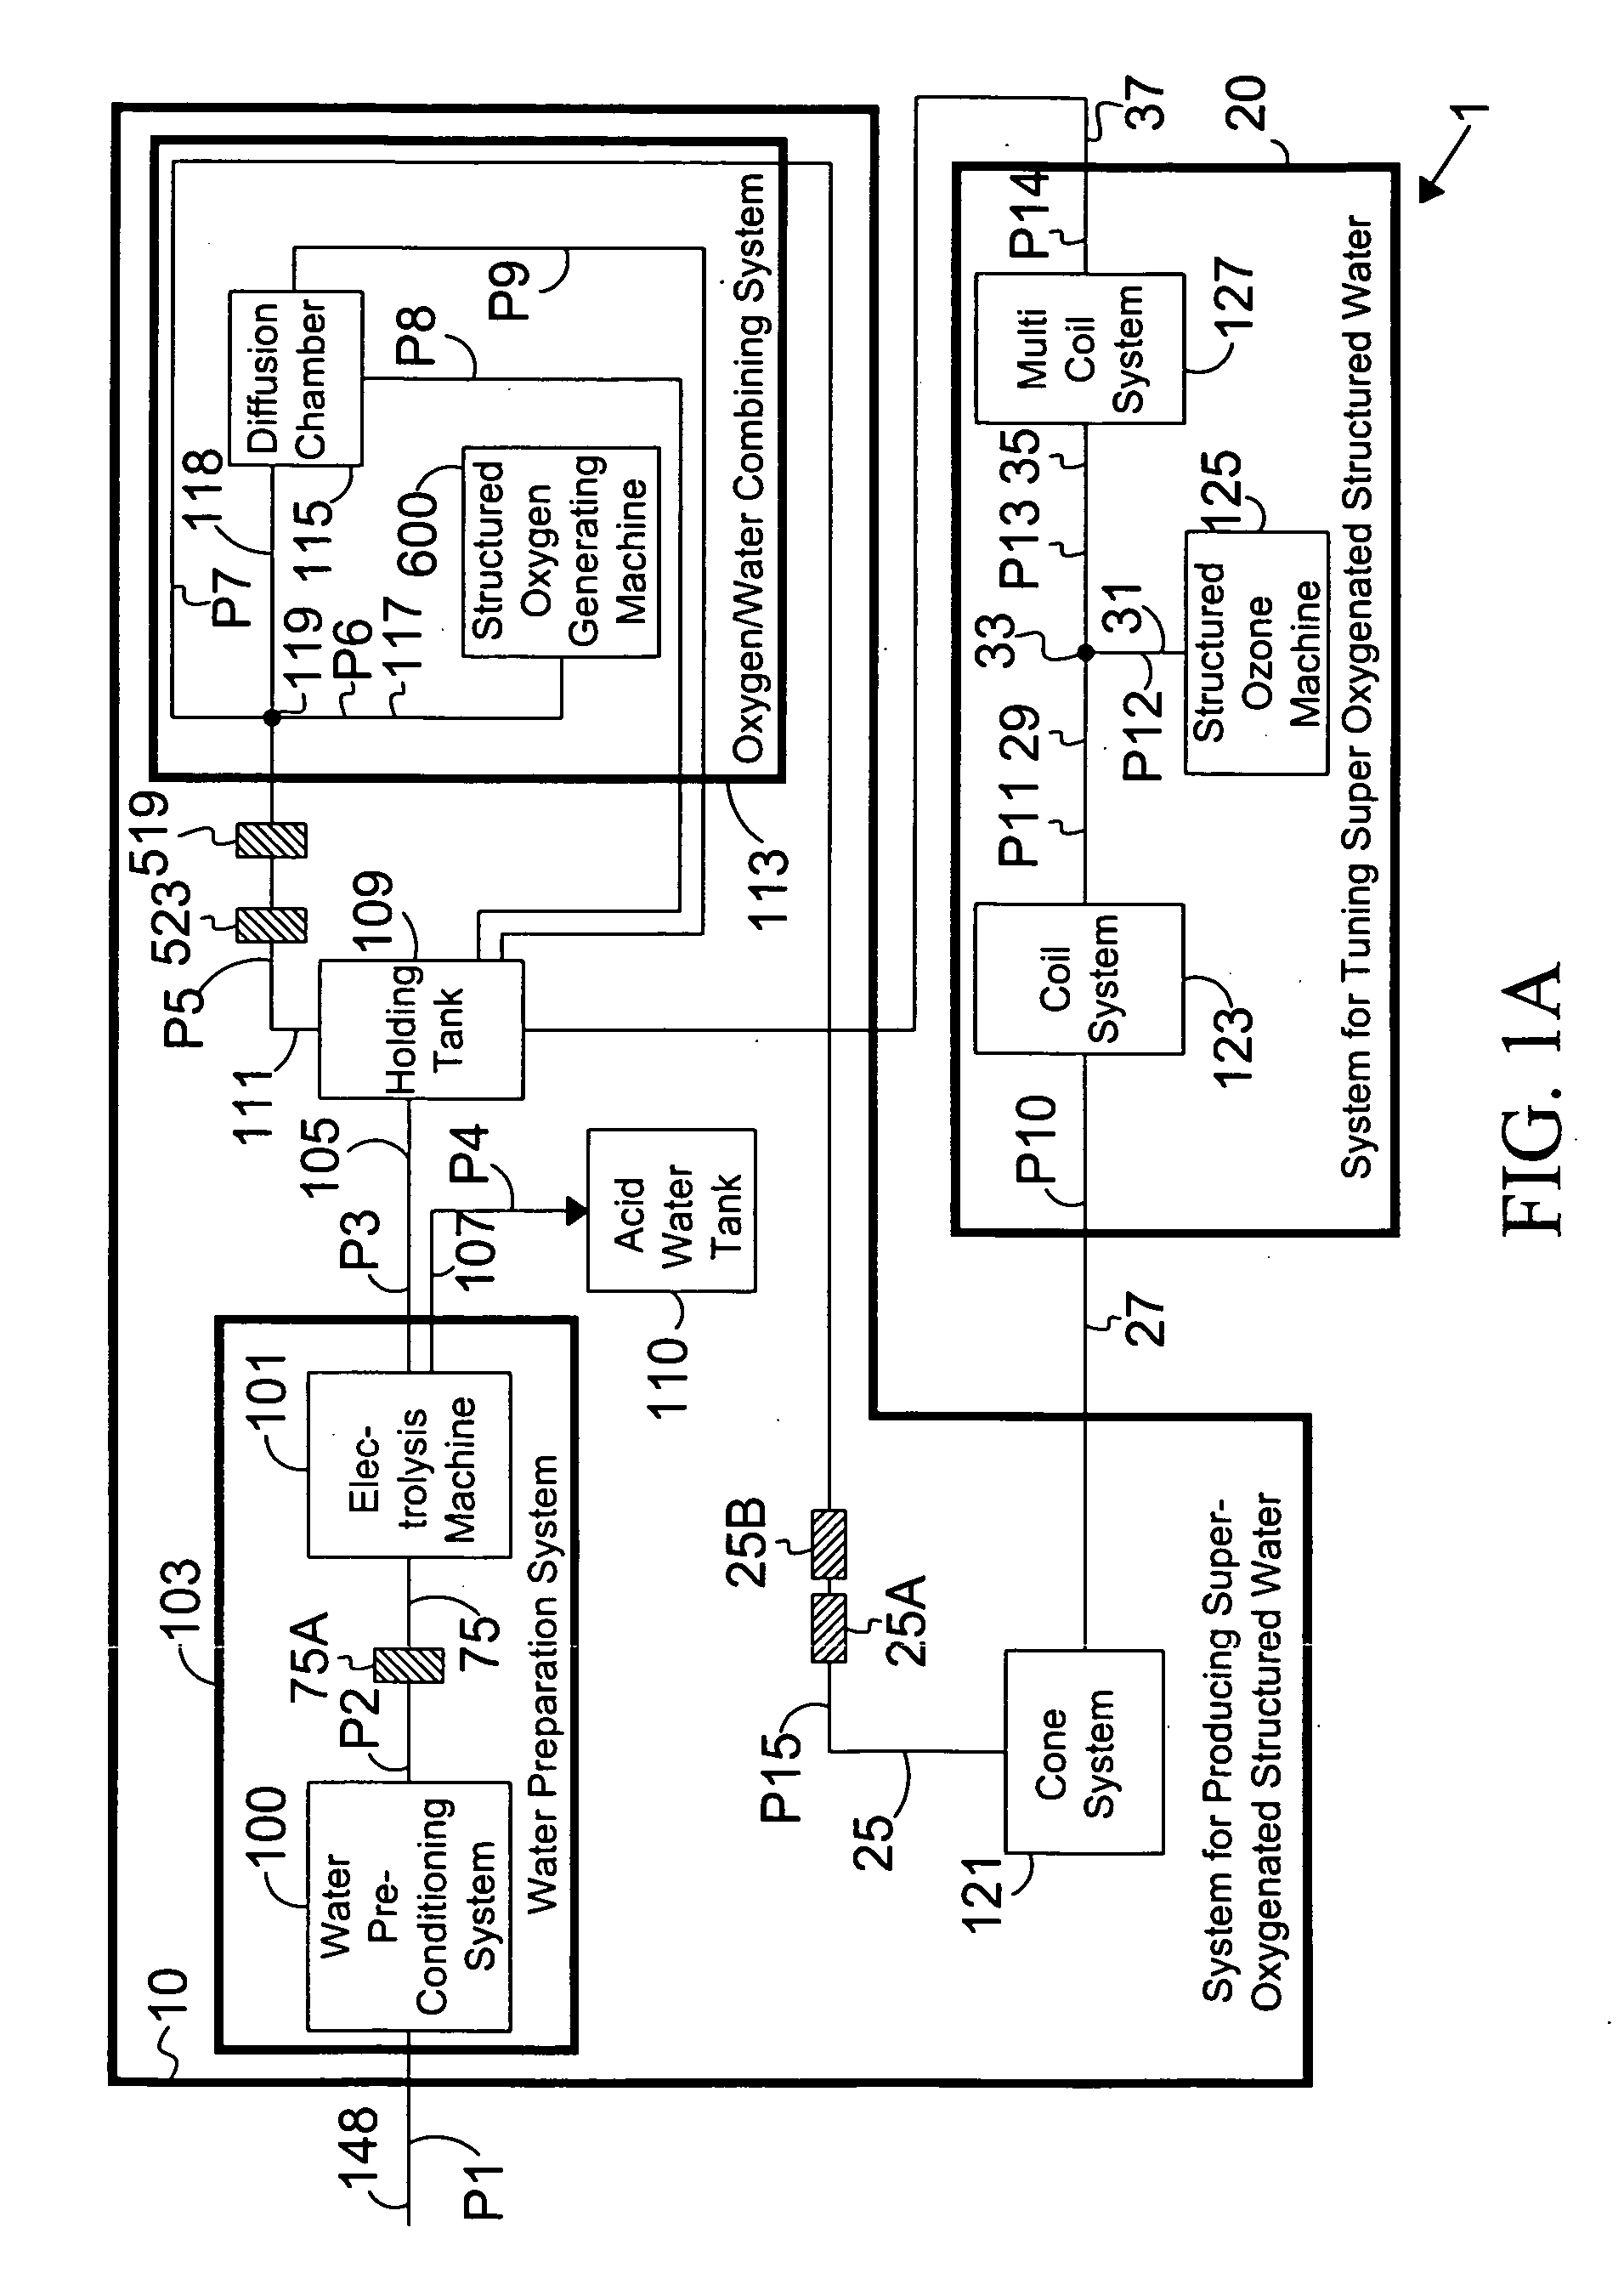 Method for super-oxygenating water